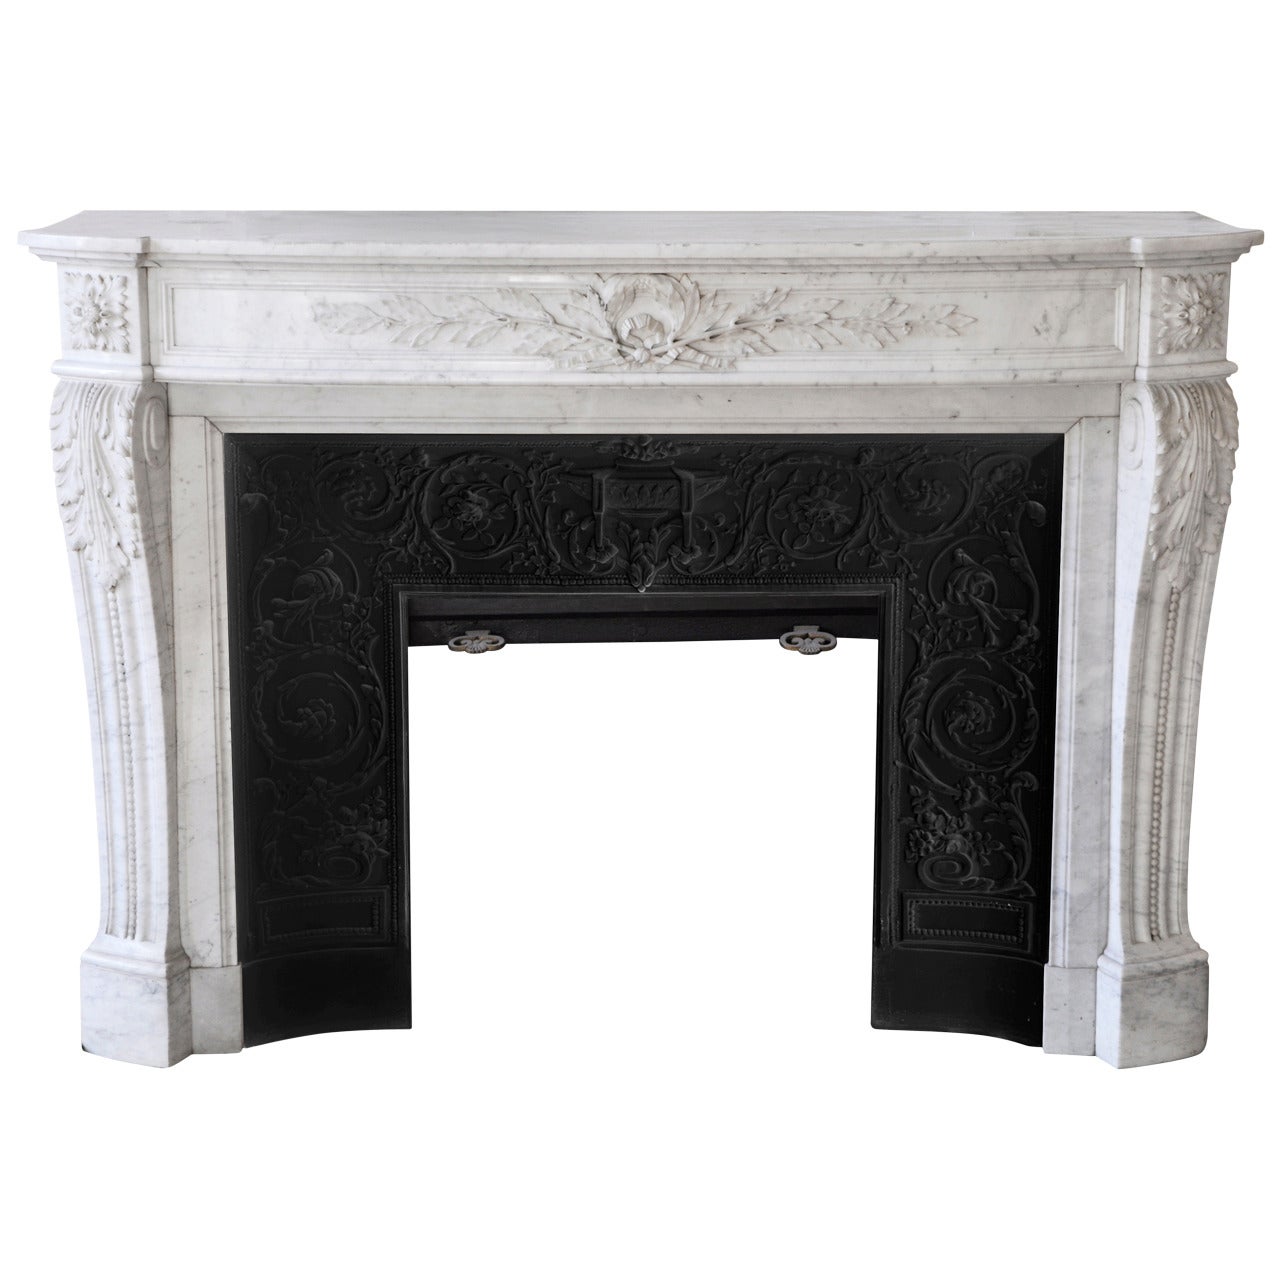 Antique Louis XVI Style Fireplace with Cured Frieze, 19th Century